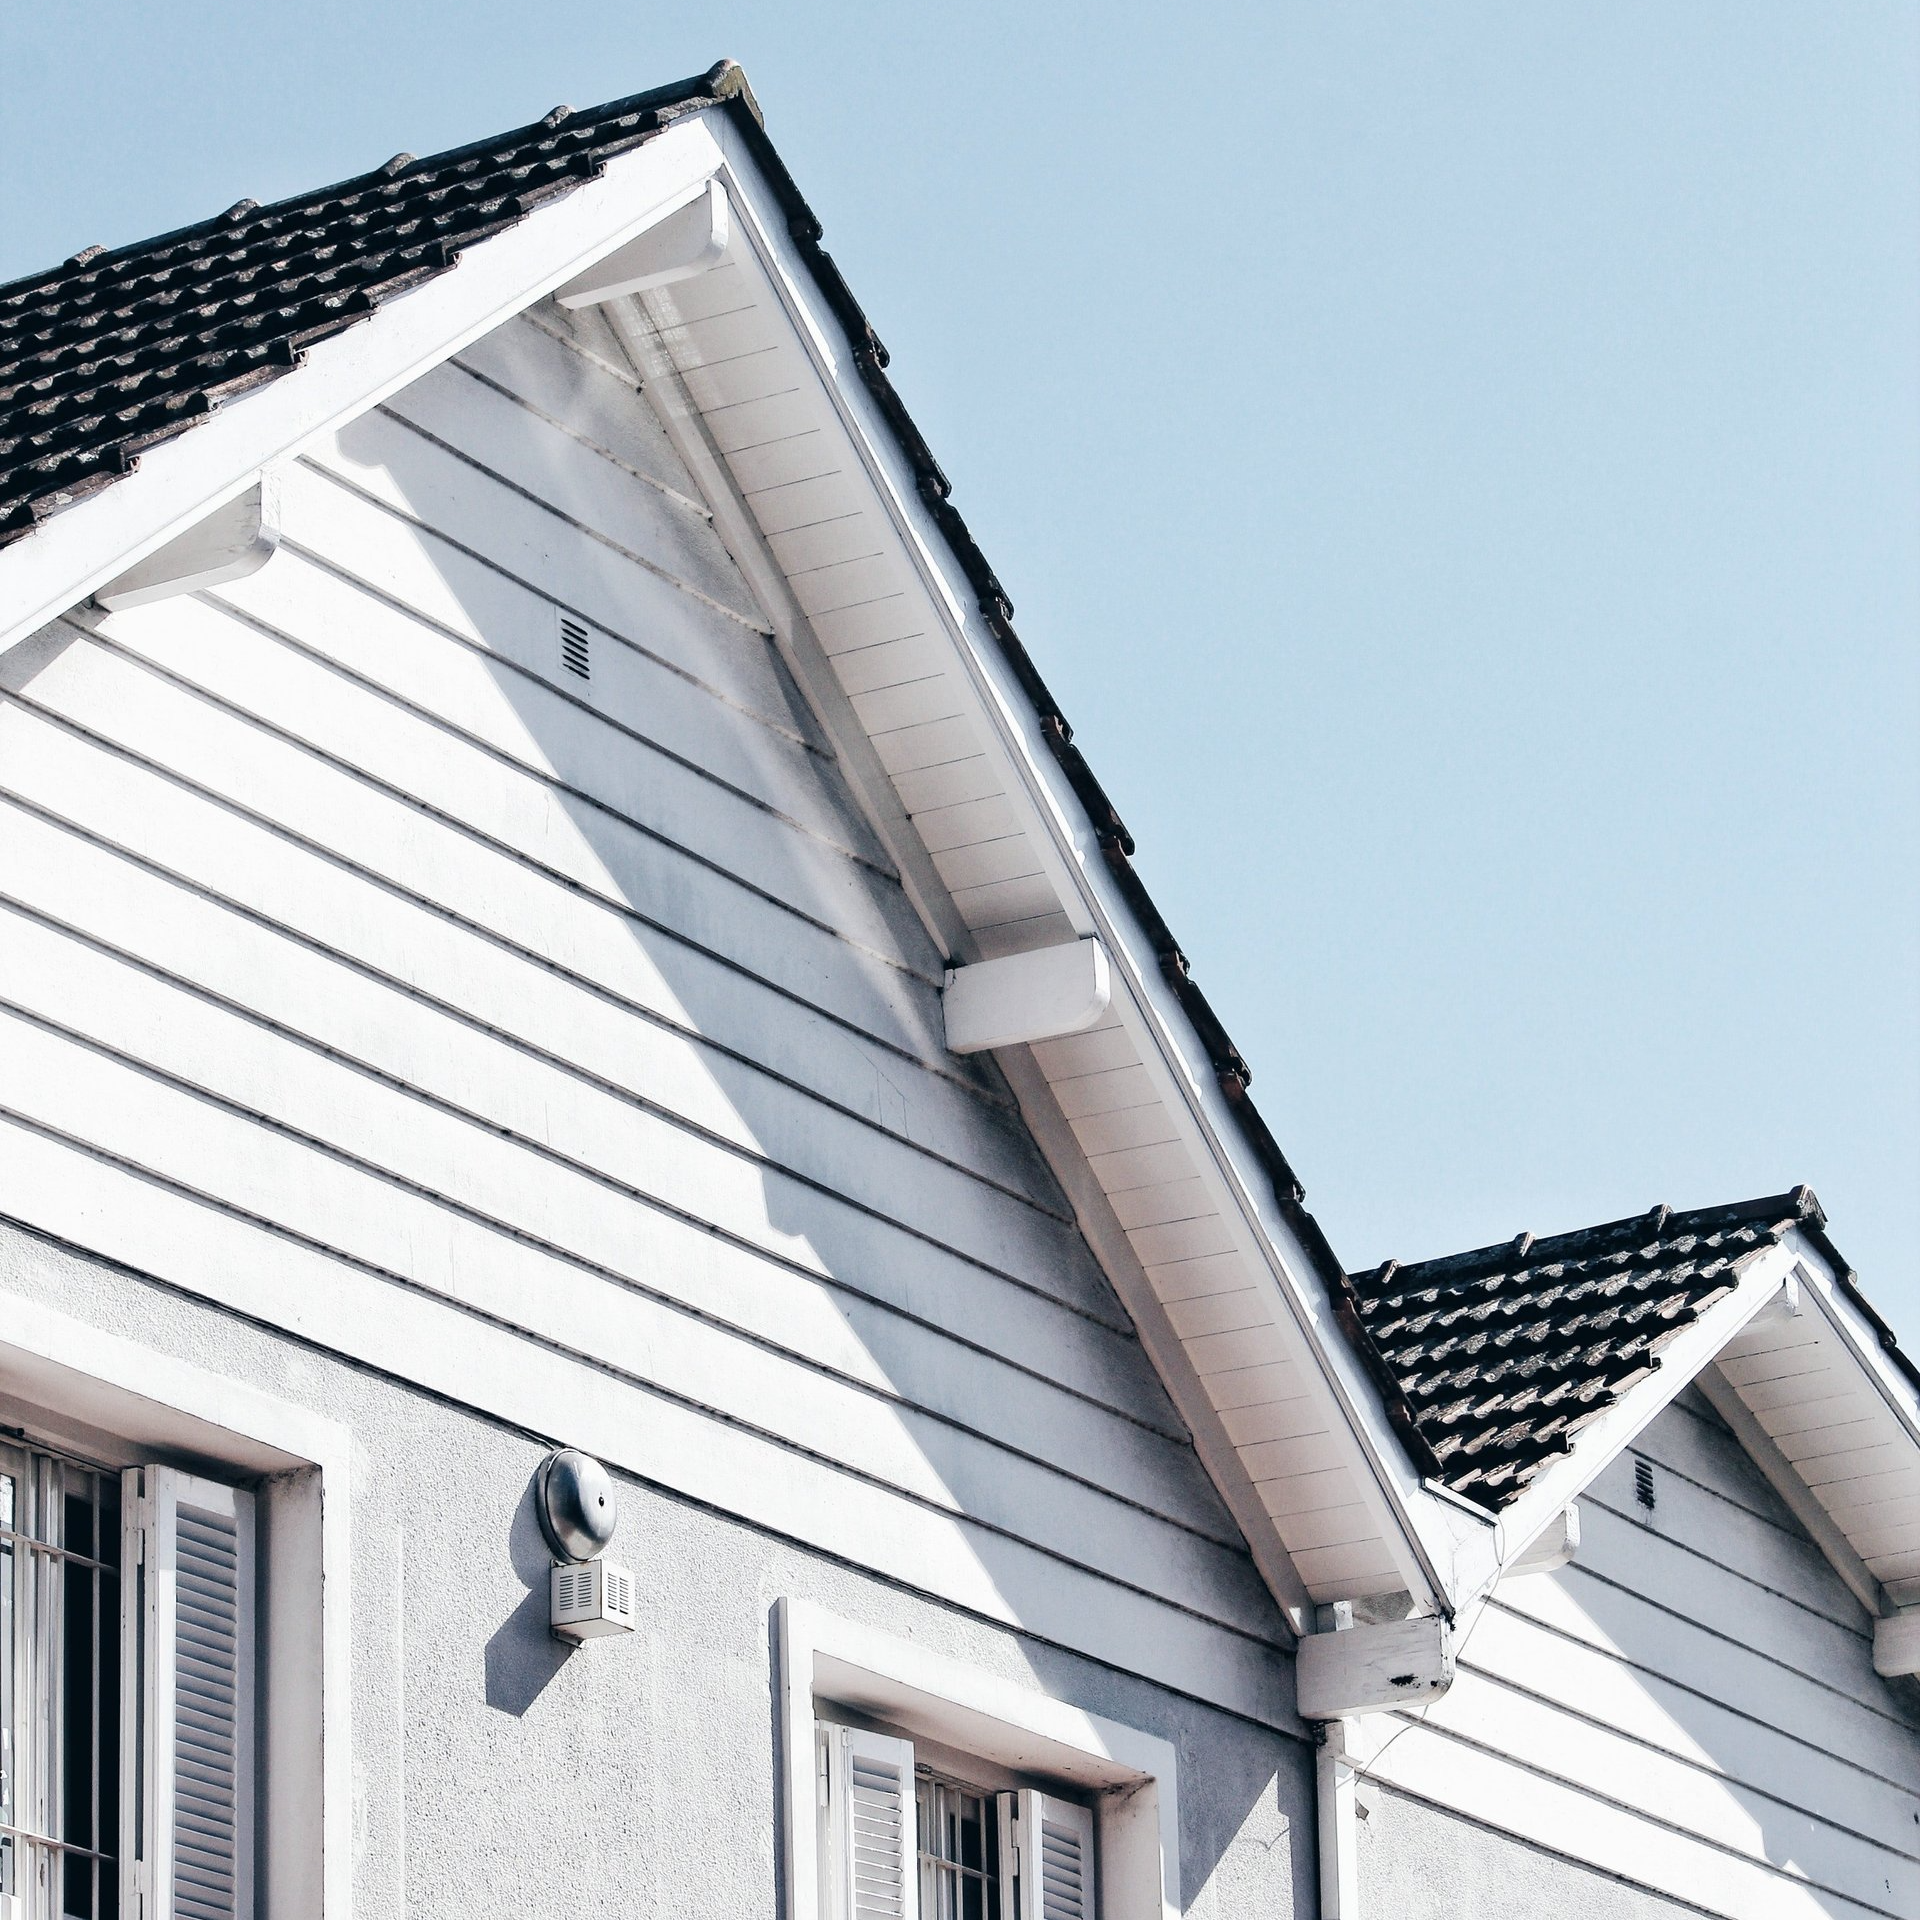 How do you know if your siding needs to be replaced